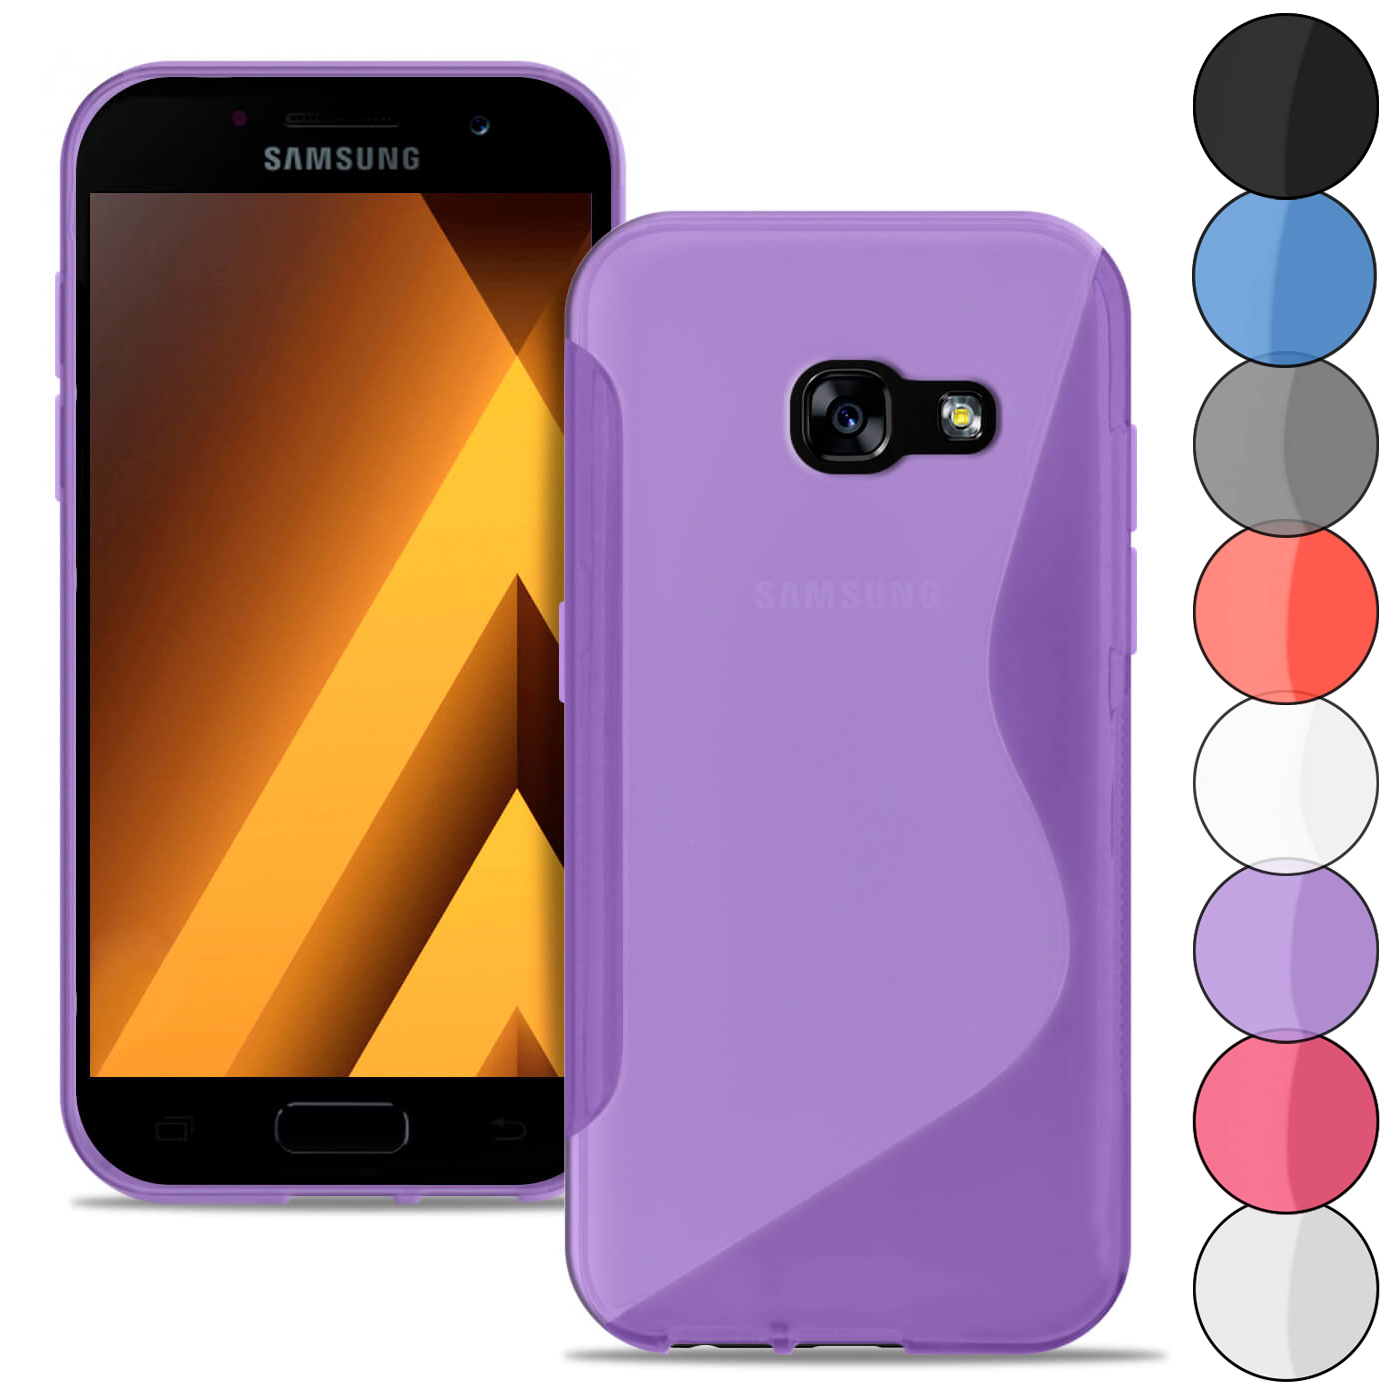 SLine Slim Cover for Samsung Galaxy A7 (2017) Ultra Thin Rubber Patterned Light eBay